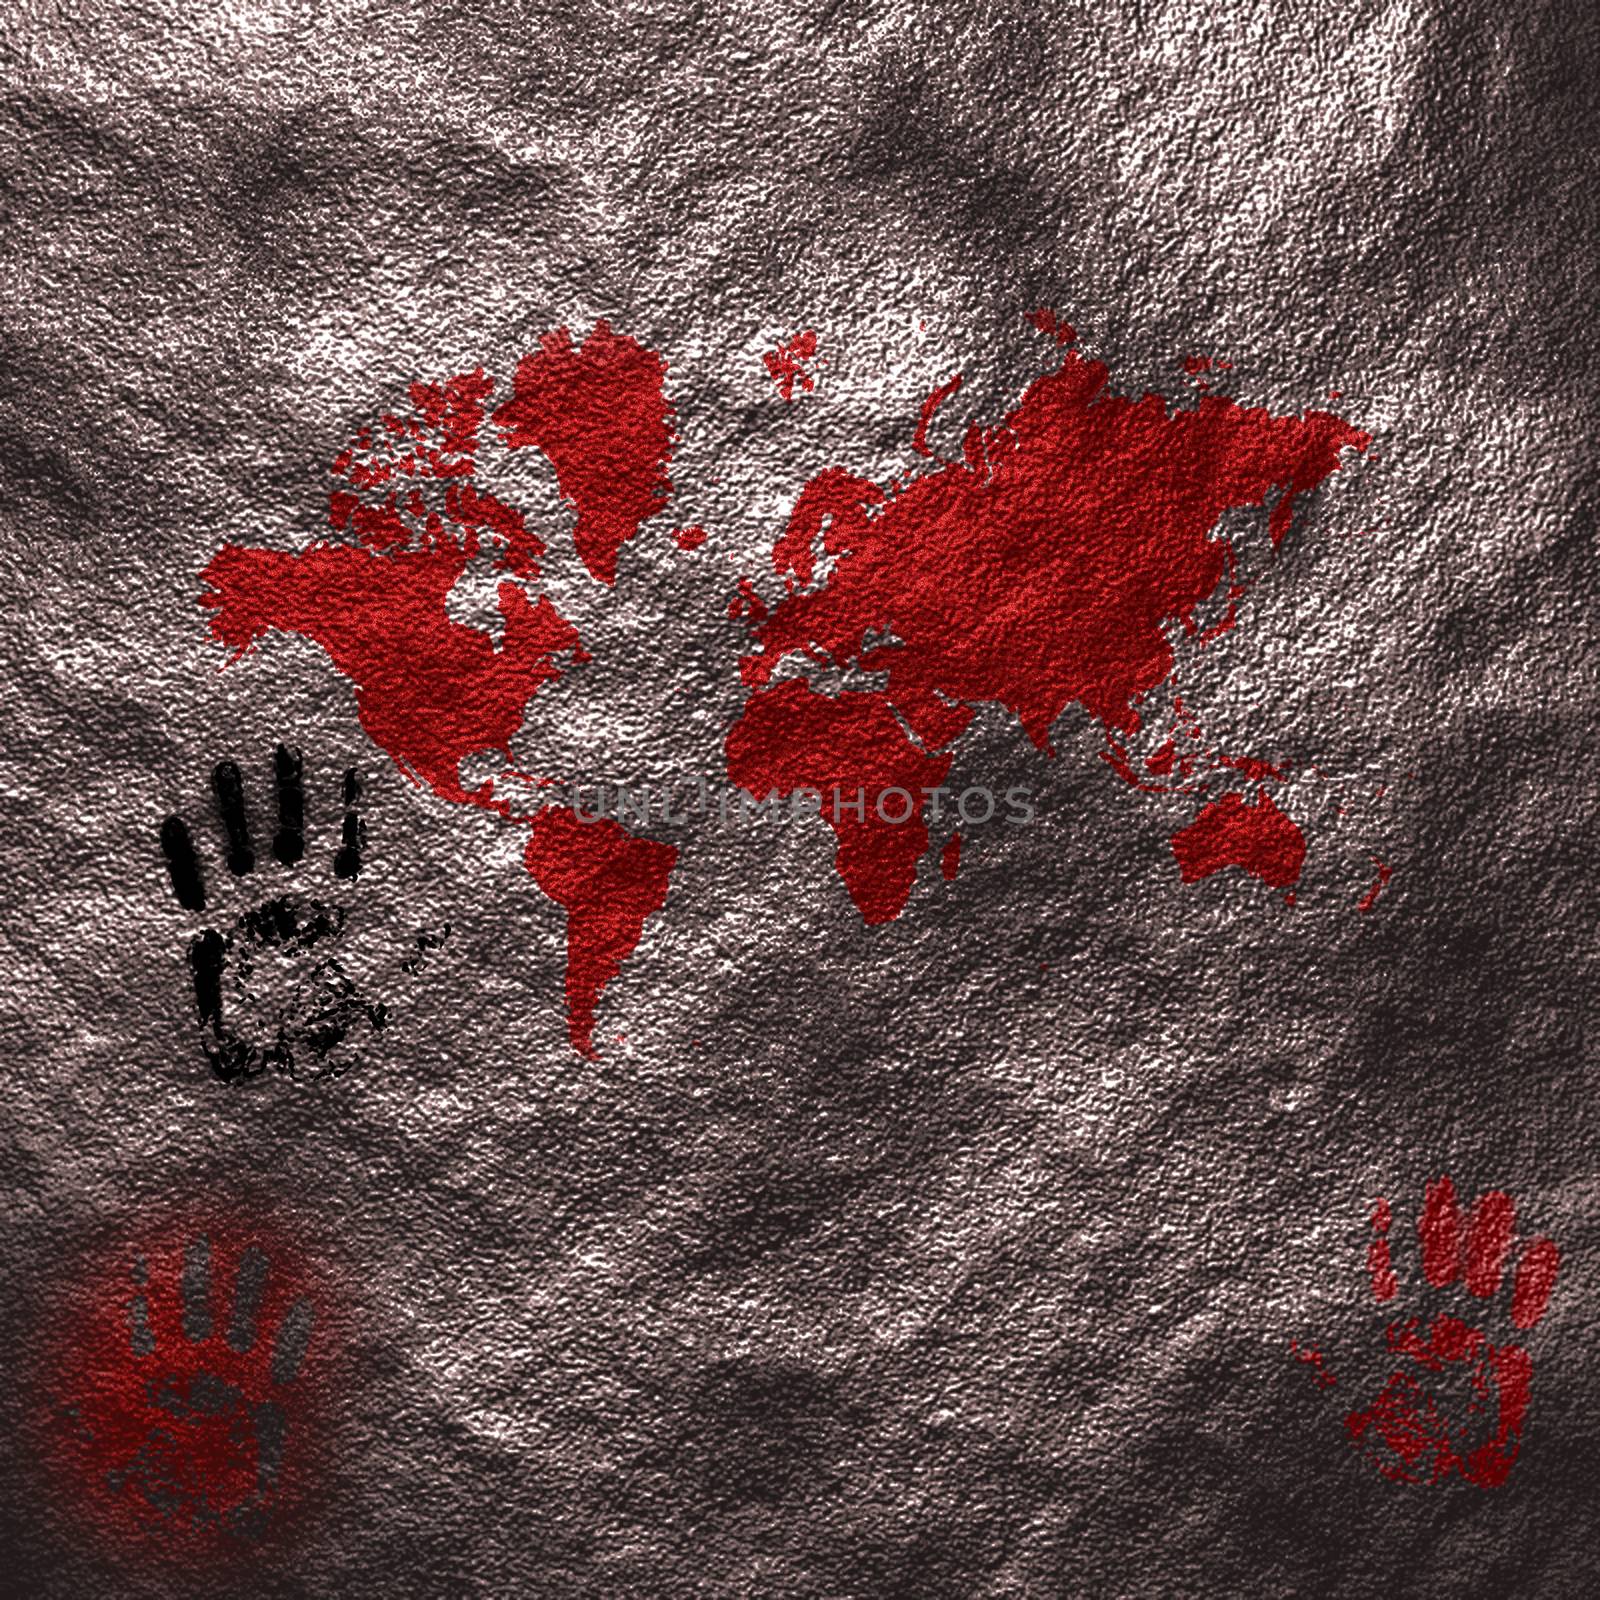 The blood of world. 3D rendering